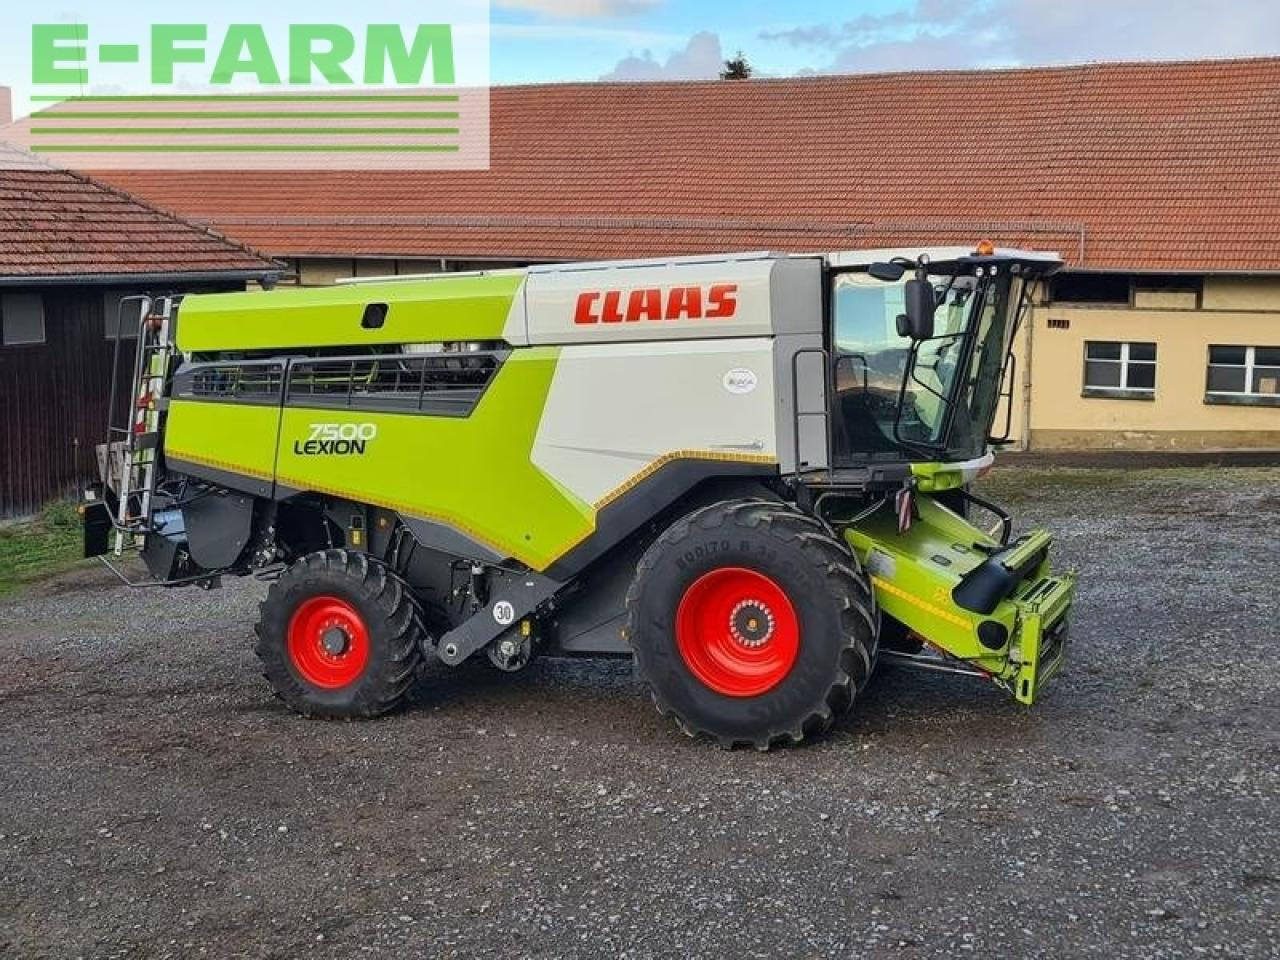 Farm tractor CLAAS lexion 7500: picture 2